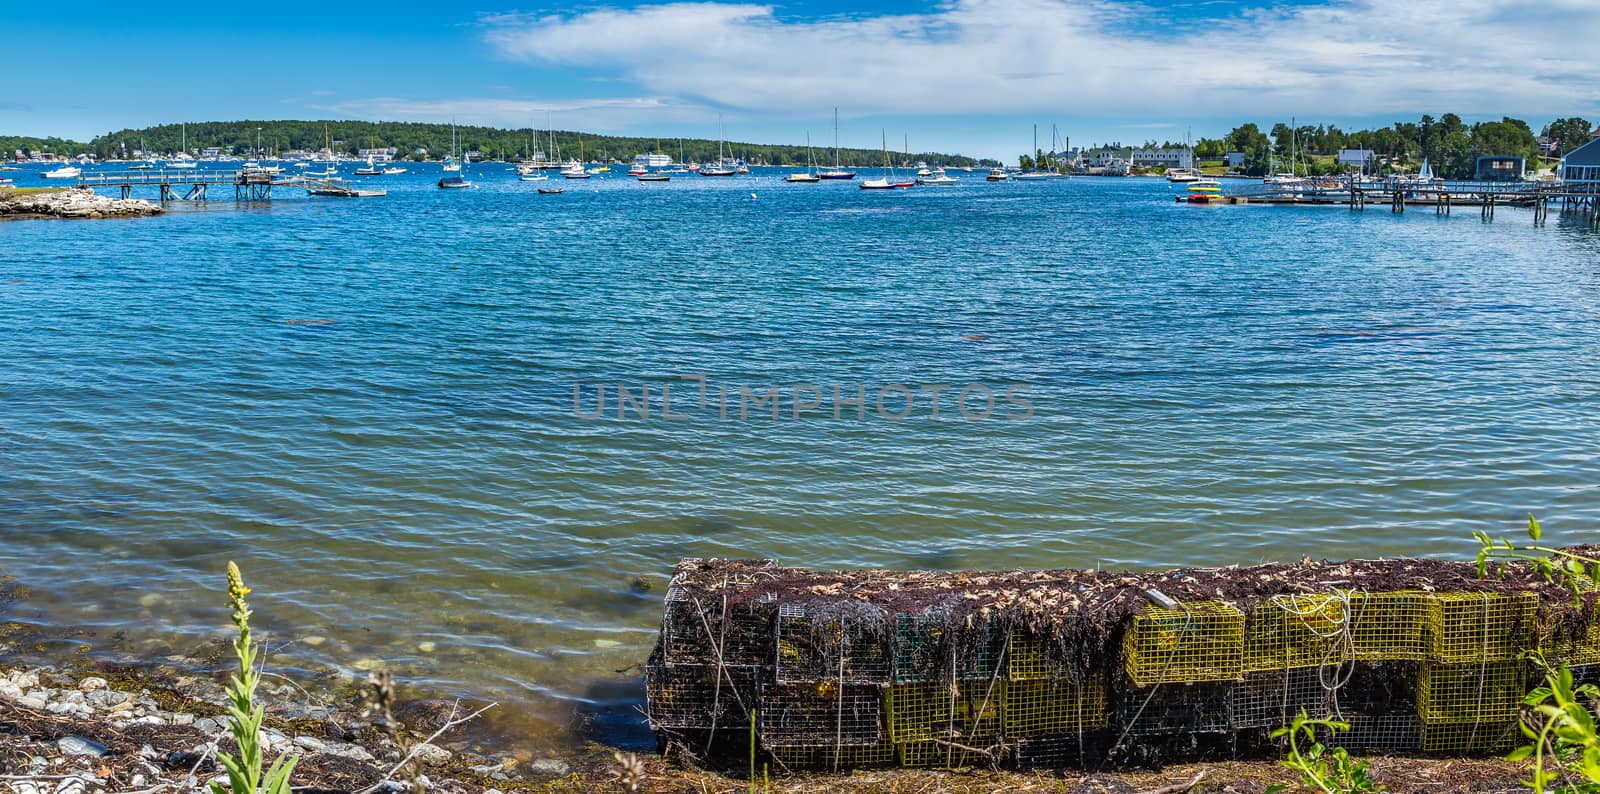 Lobster traps wait along the shore of West Boothbay Harbor at Cape Newagen on the coast of Maine.